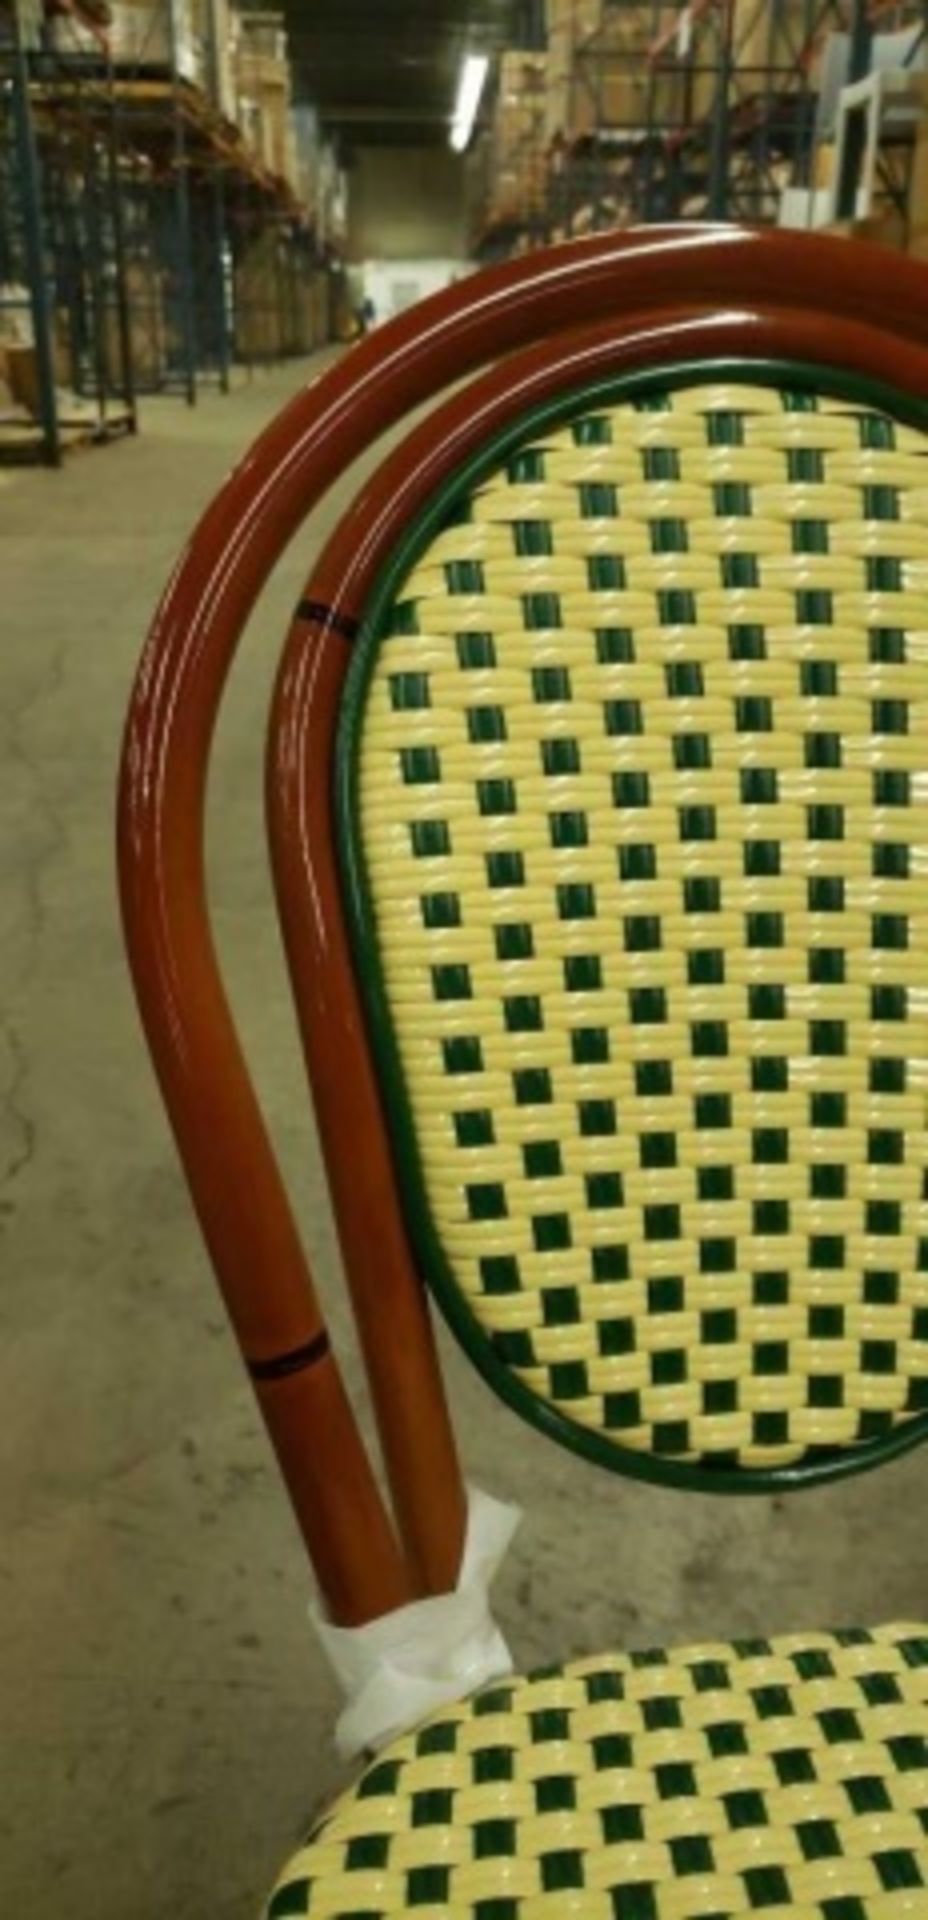 Parisienne Side Chair - Ivory/Green, A57-SC IG. PE Weave on Tubular Aluminum Frame/Powder coat - Image 5 of 7